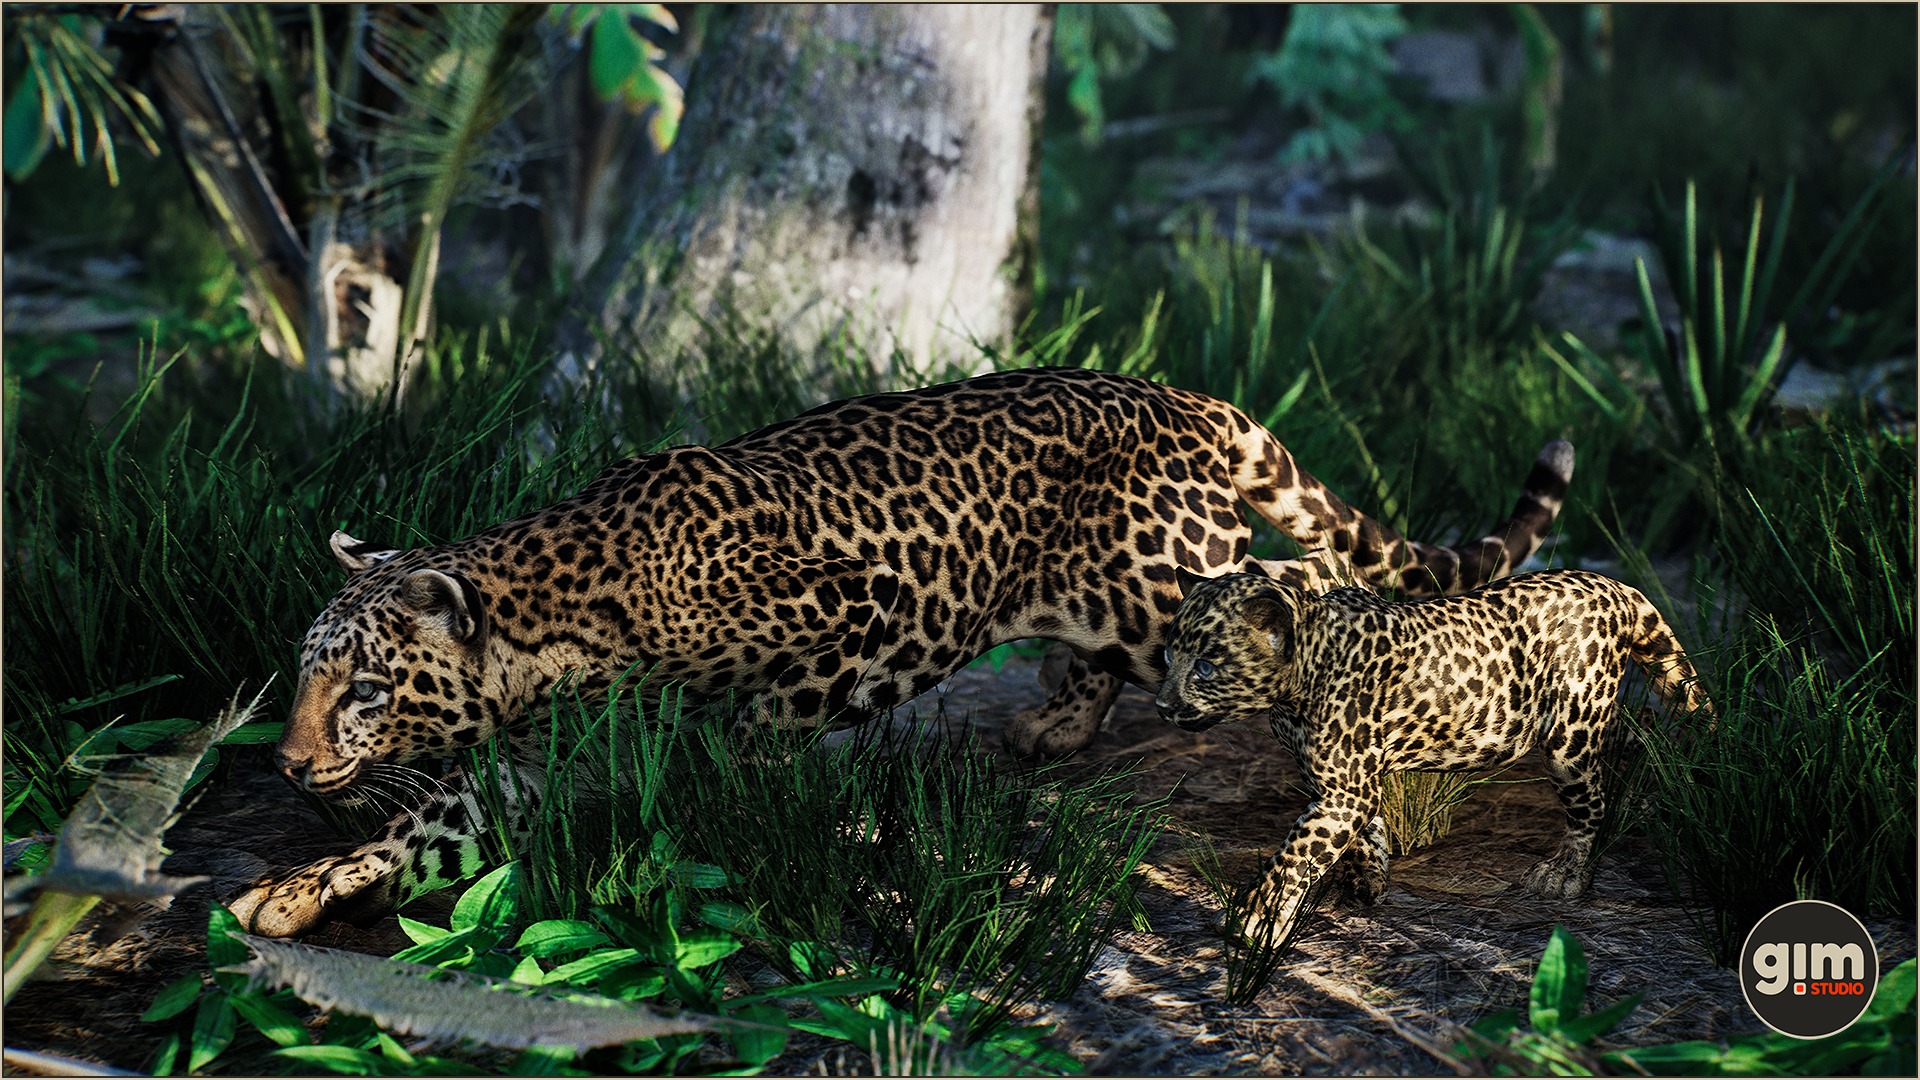 Leopard father teaching his young son how to hunt